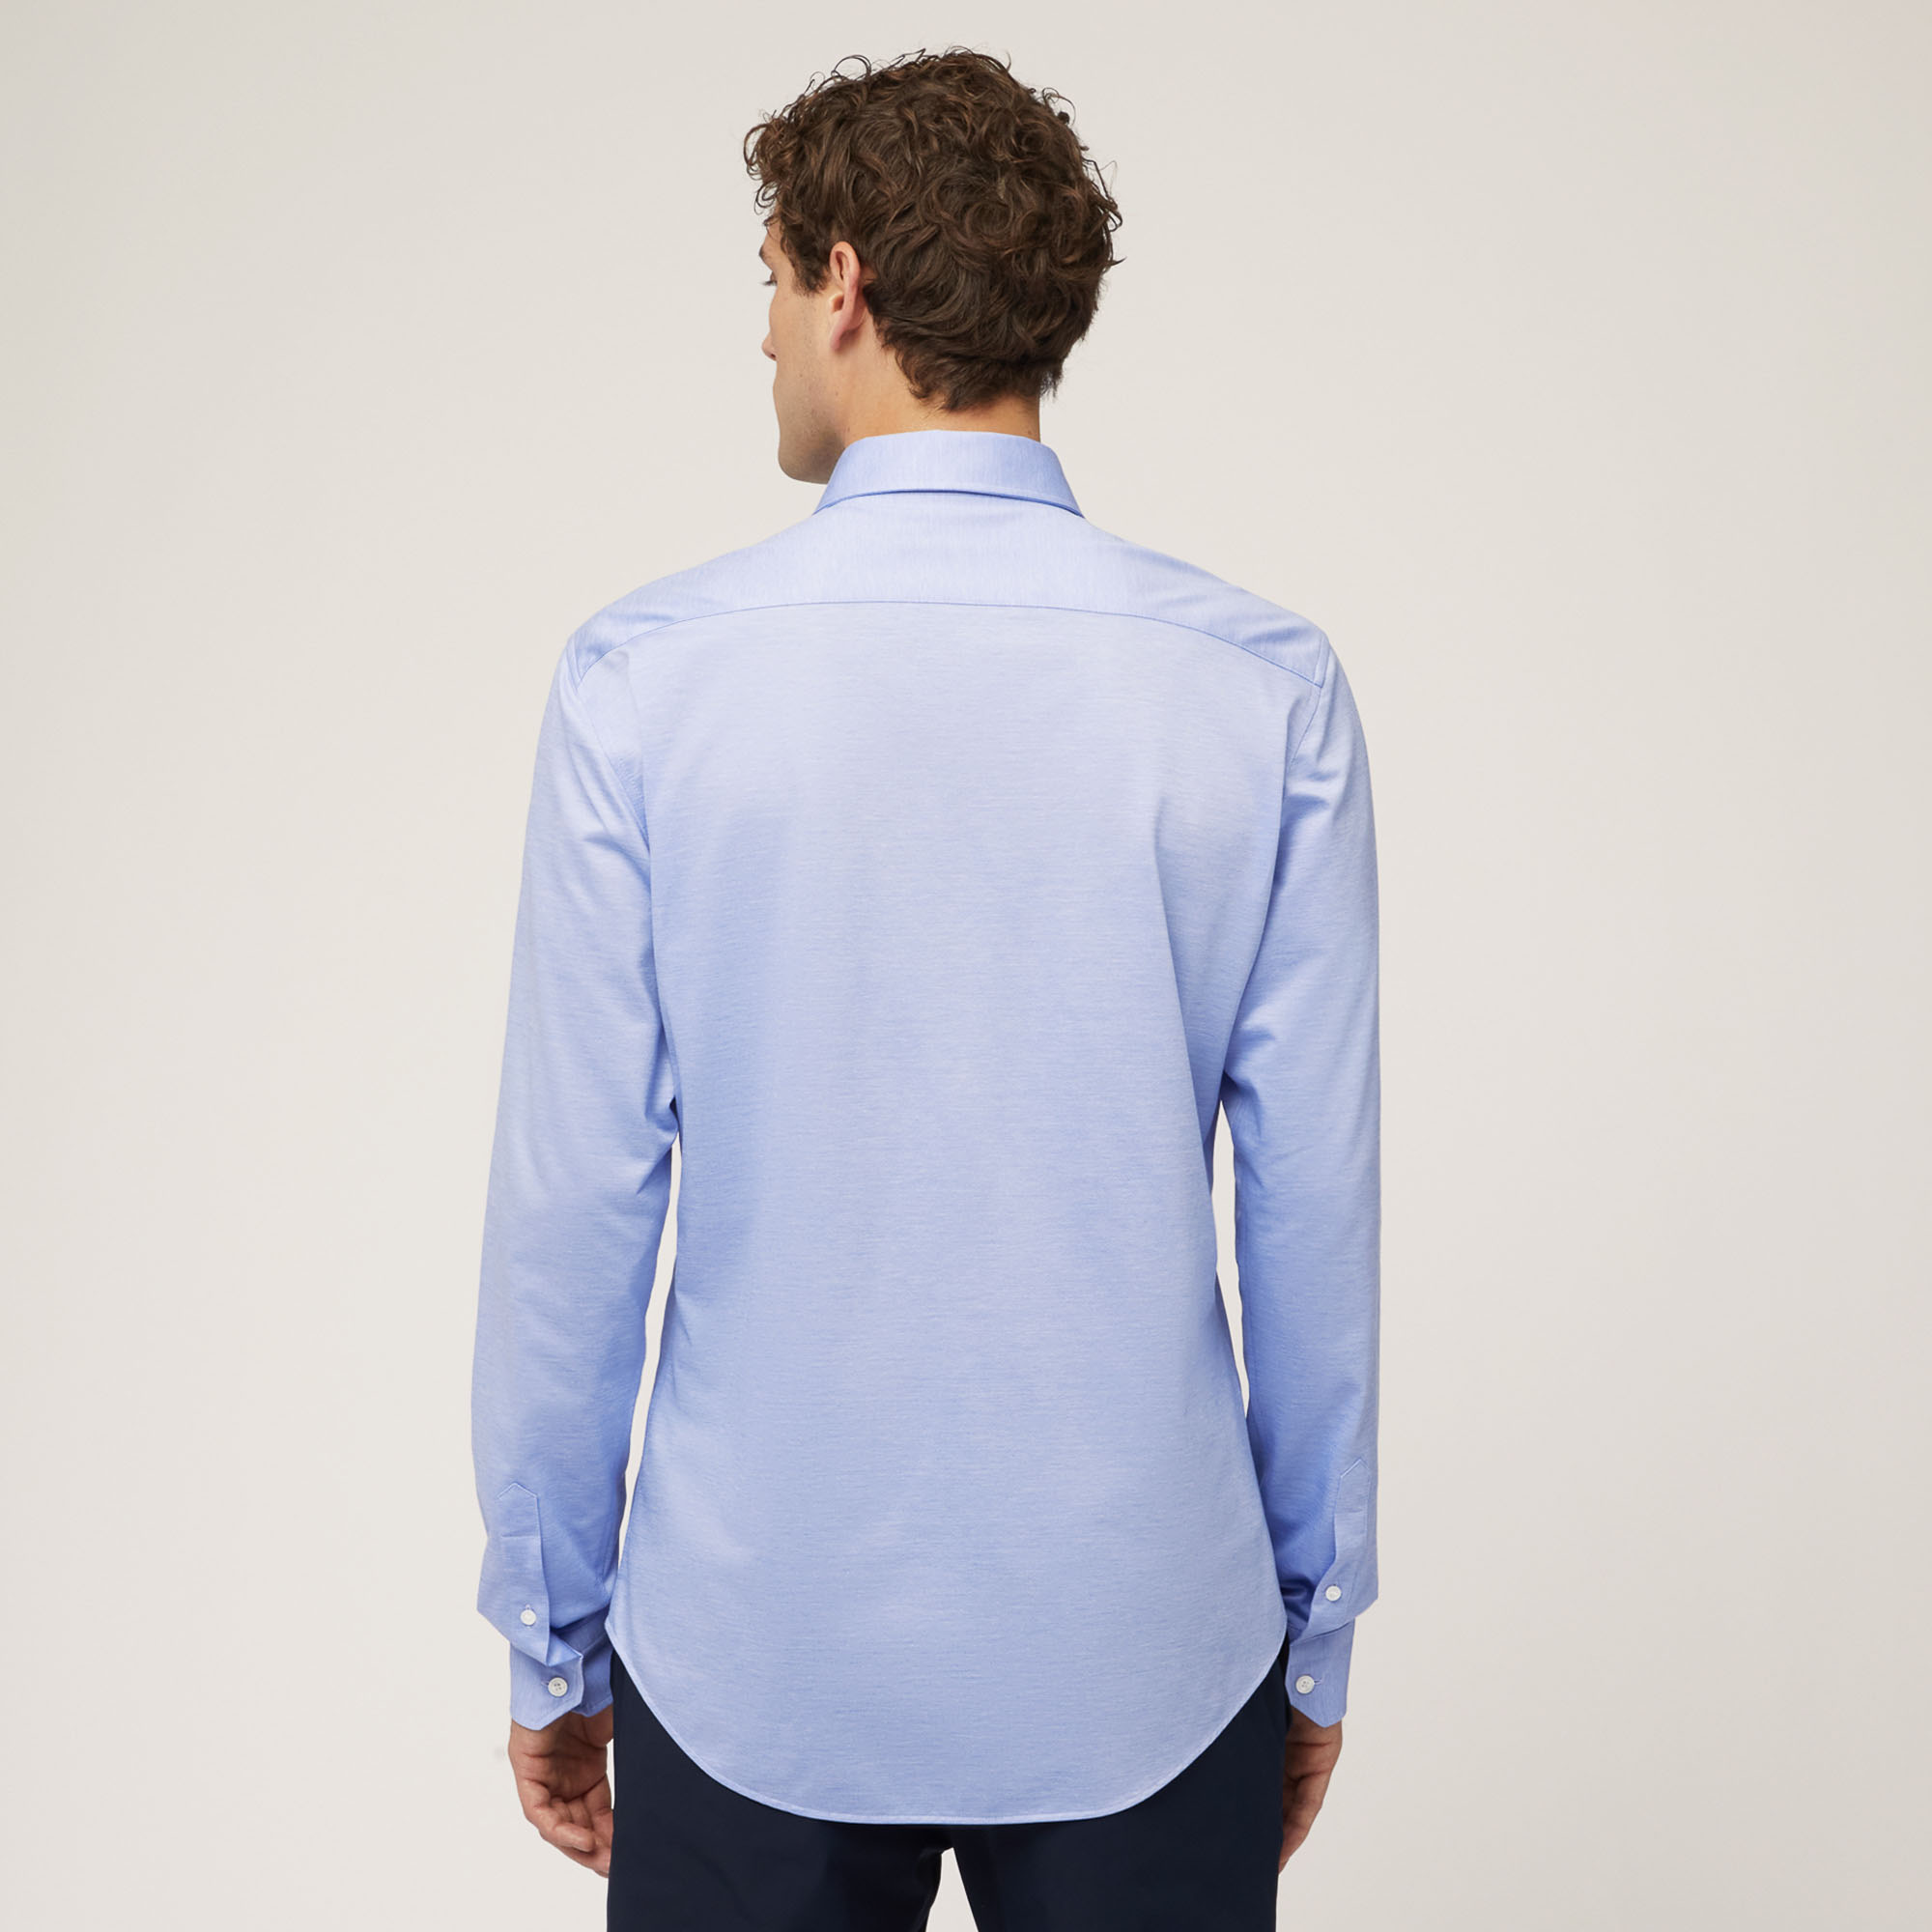 Cotton Shirt with Rounded Hem